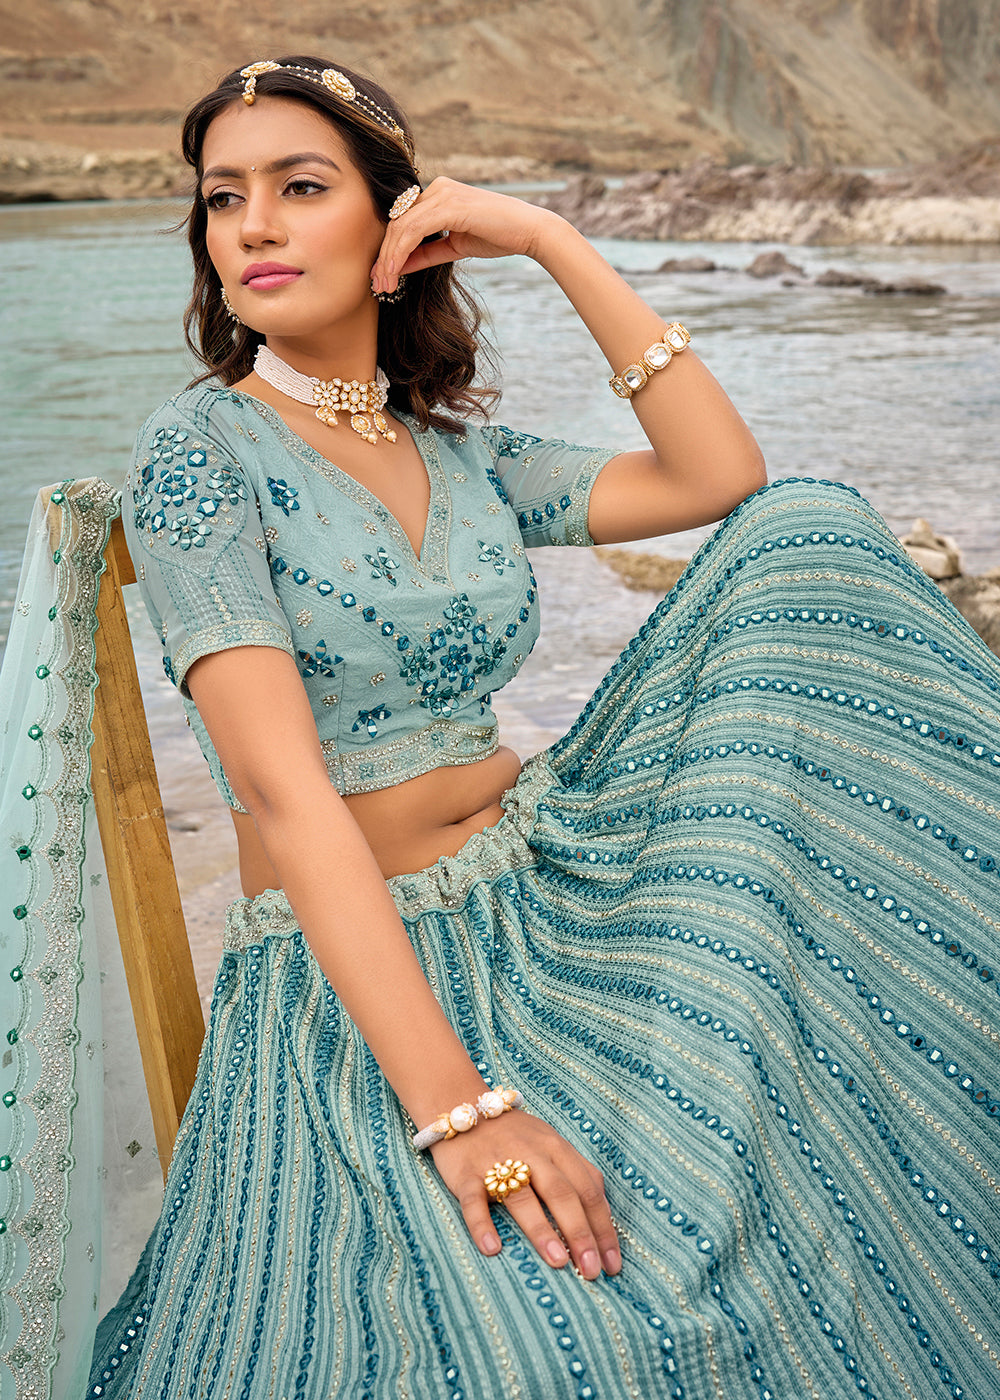 Buy Now Mint Blue Embroidered Pure Georgette Designer Bridal Lehenga Choli Online in USA, UK, Canada & Worldwide at Empress Clothing. 